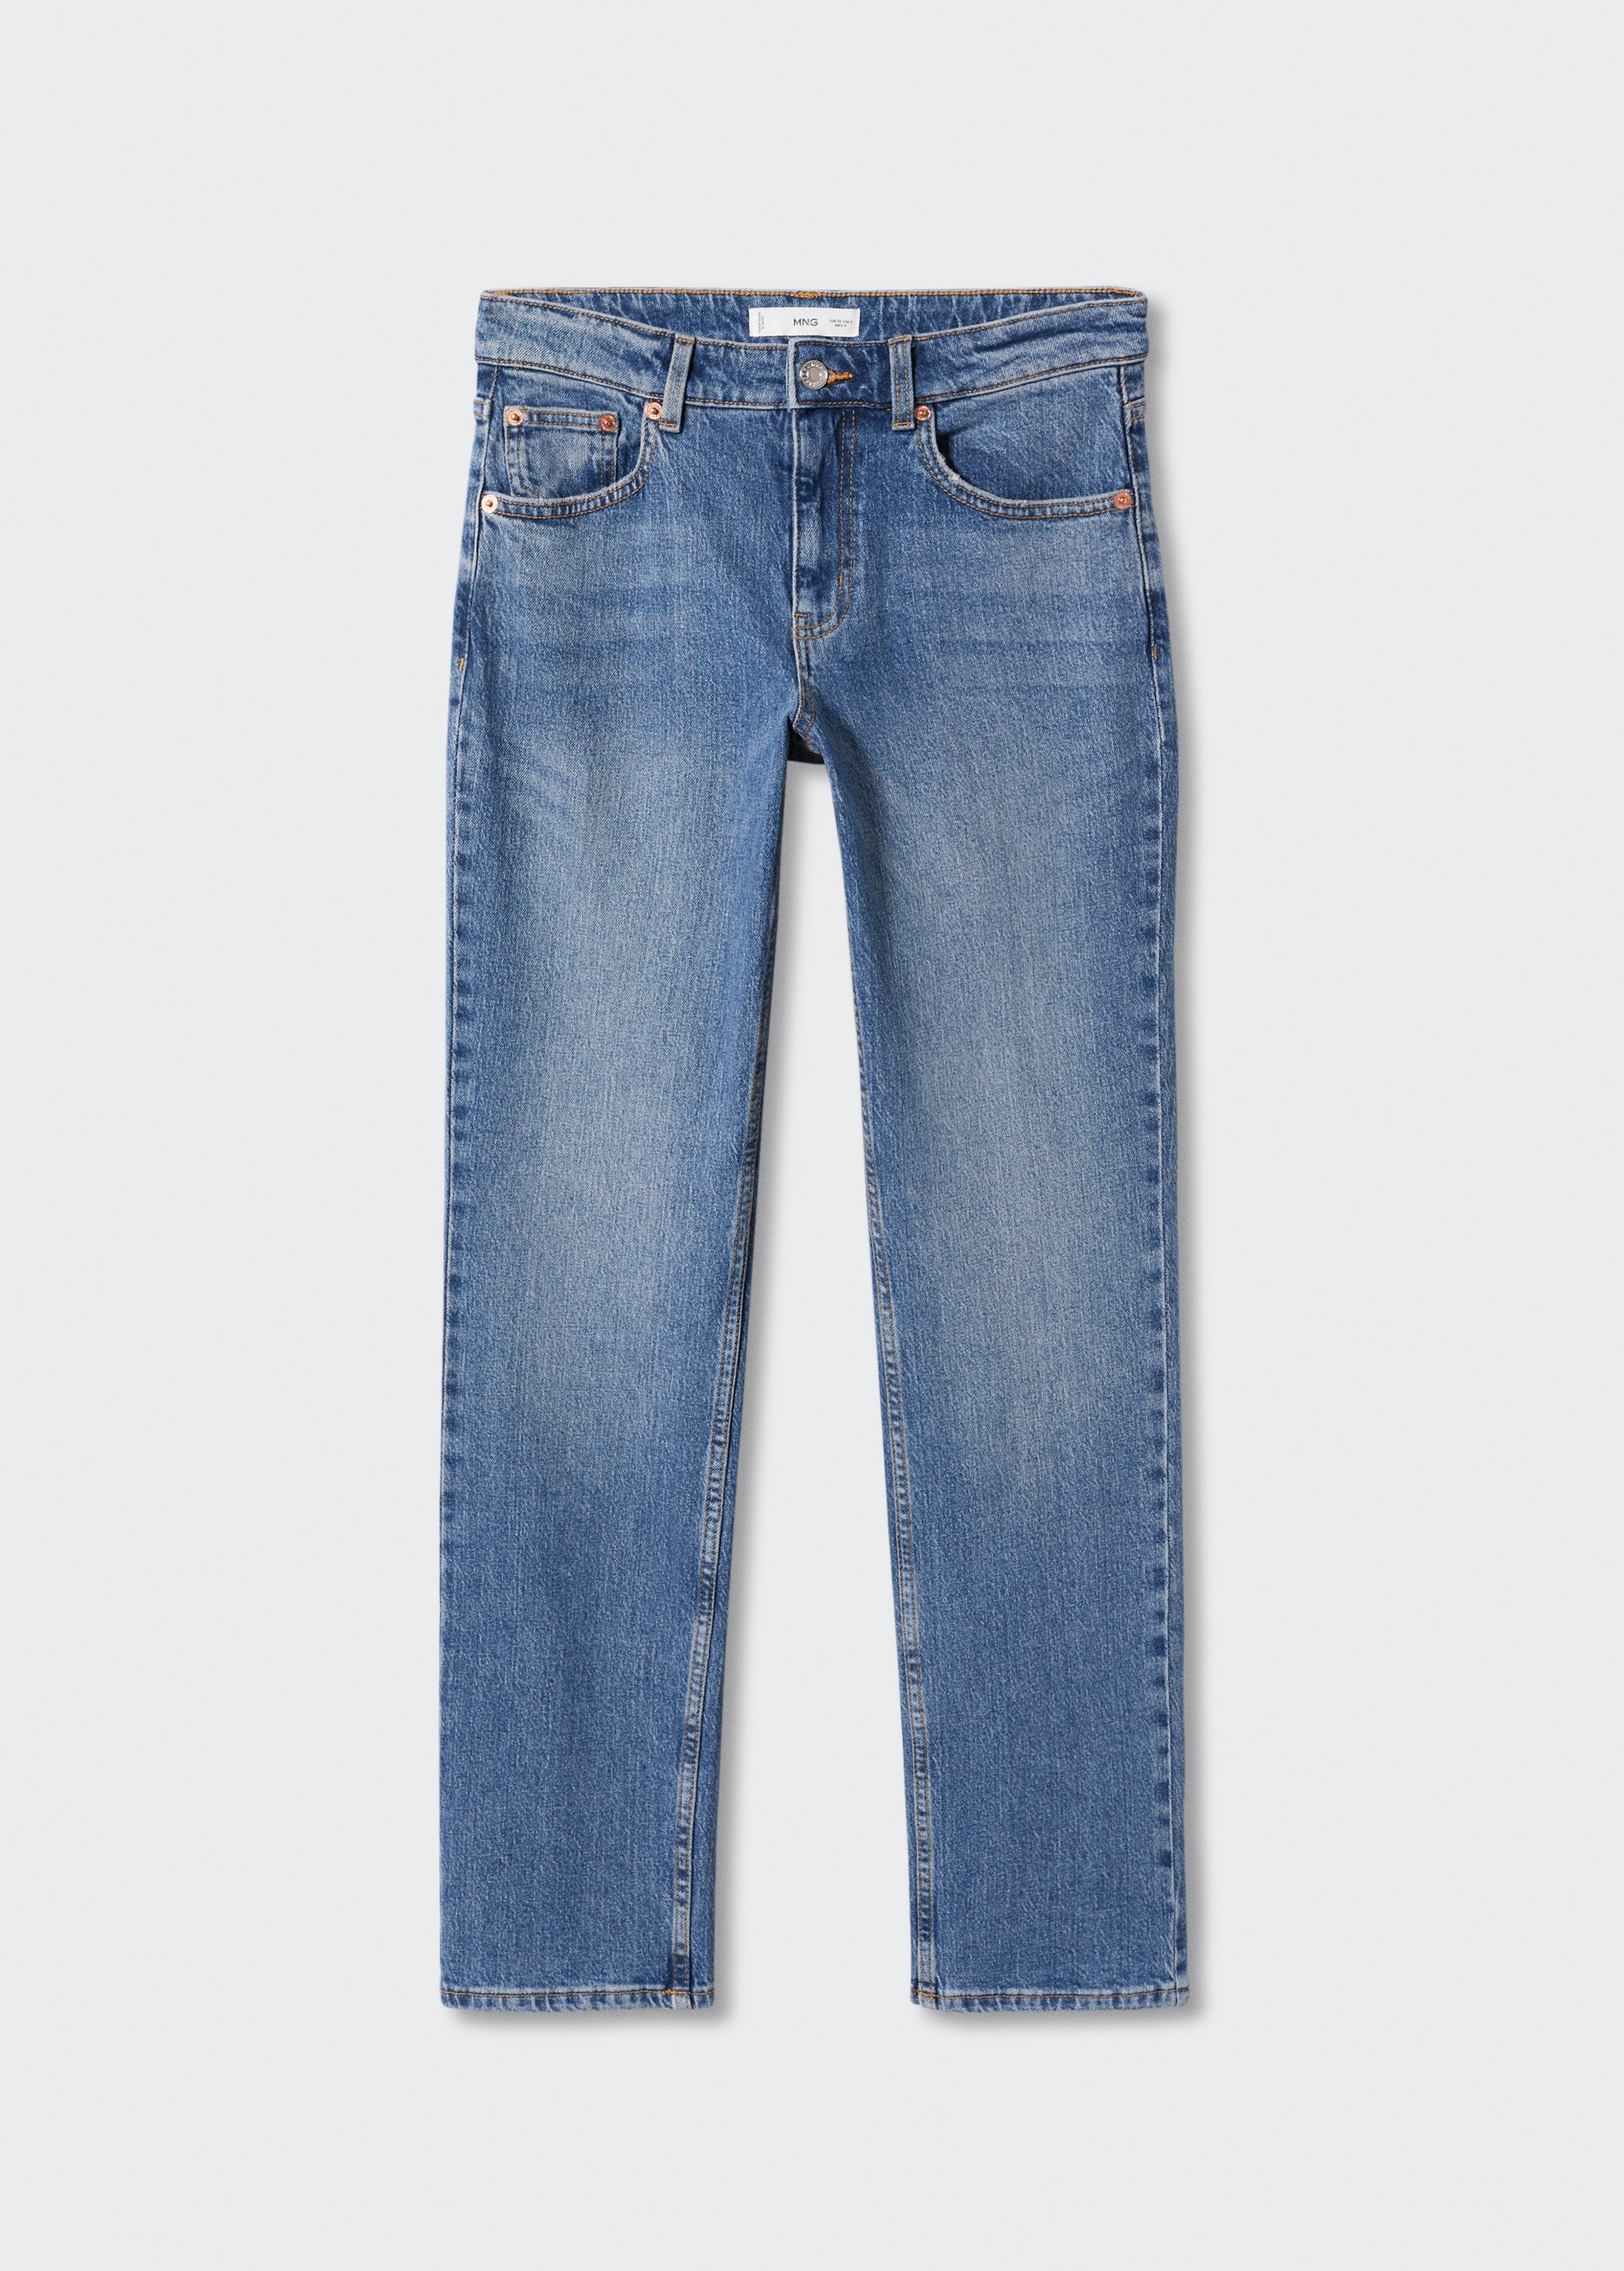 Medium-comfort straight jeans - Article without model